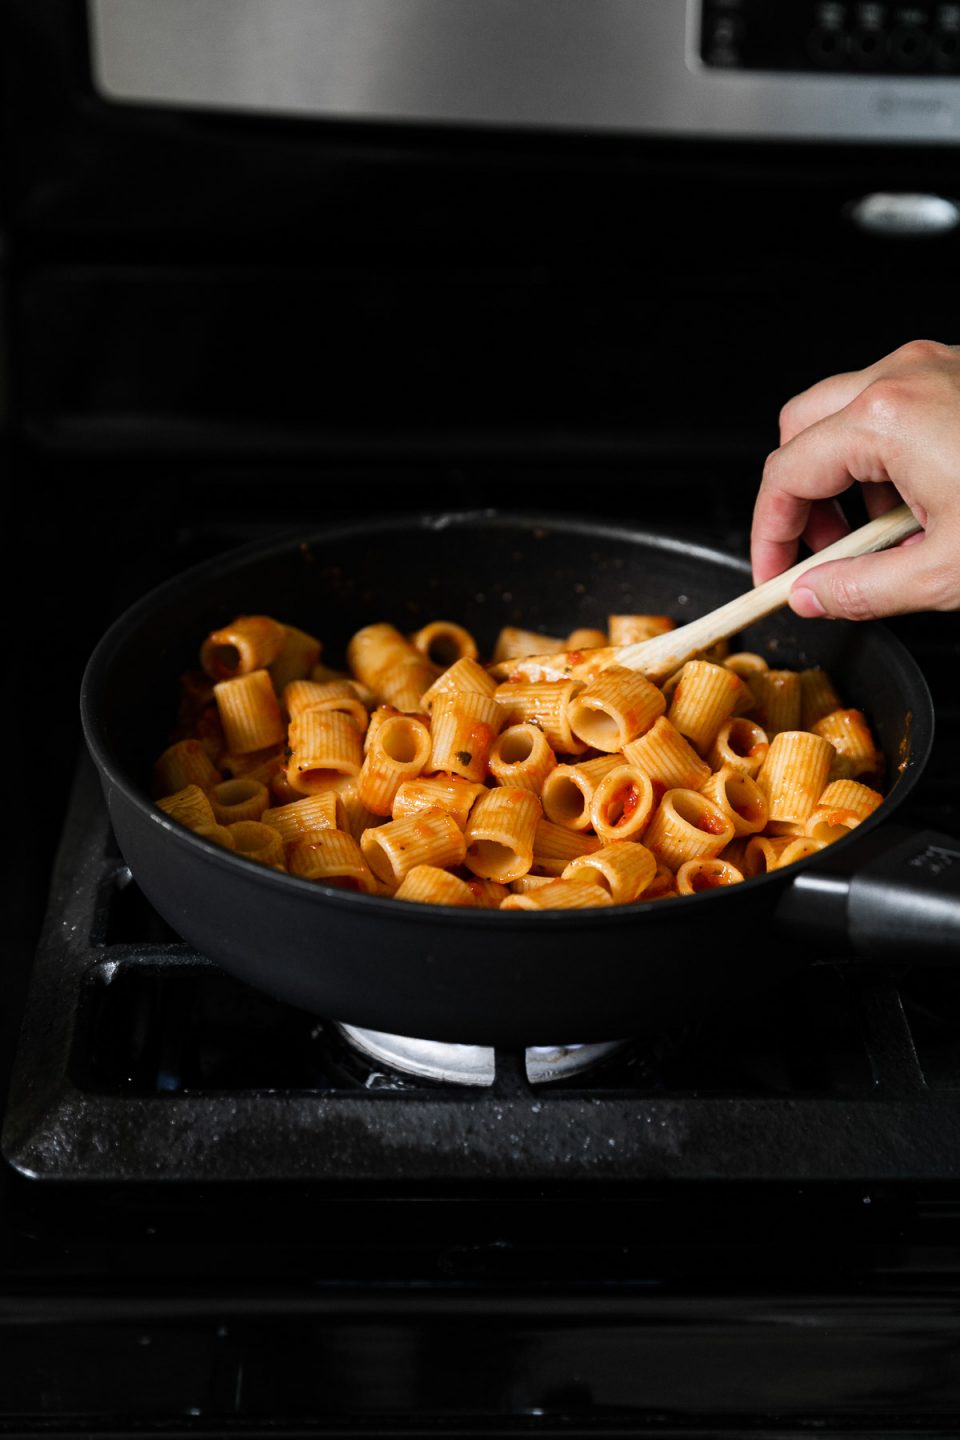 Cooked DeLallo Mezzi Rigatoni in a skillet tossed and combined with pasta sauce a woman's hand holds the skillet and a wooden spoon in her other hand to stir the pasta. The skillet rests atop a gas stovetop range.